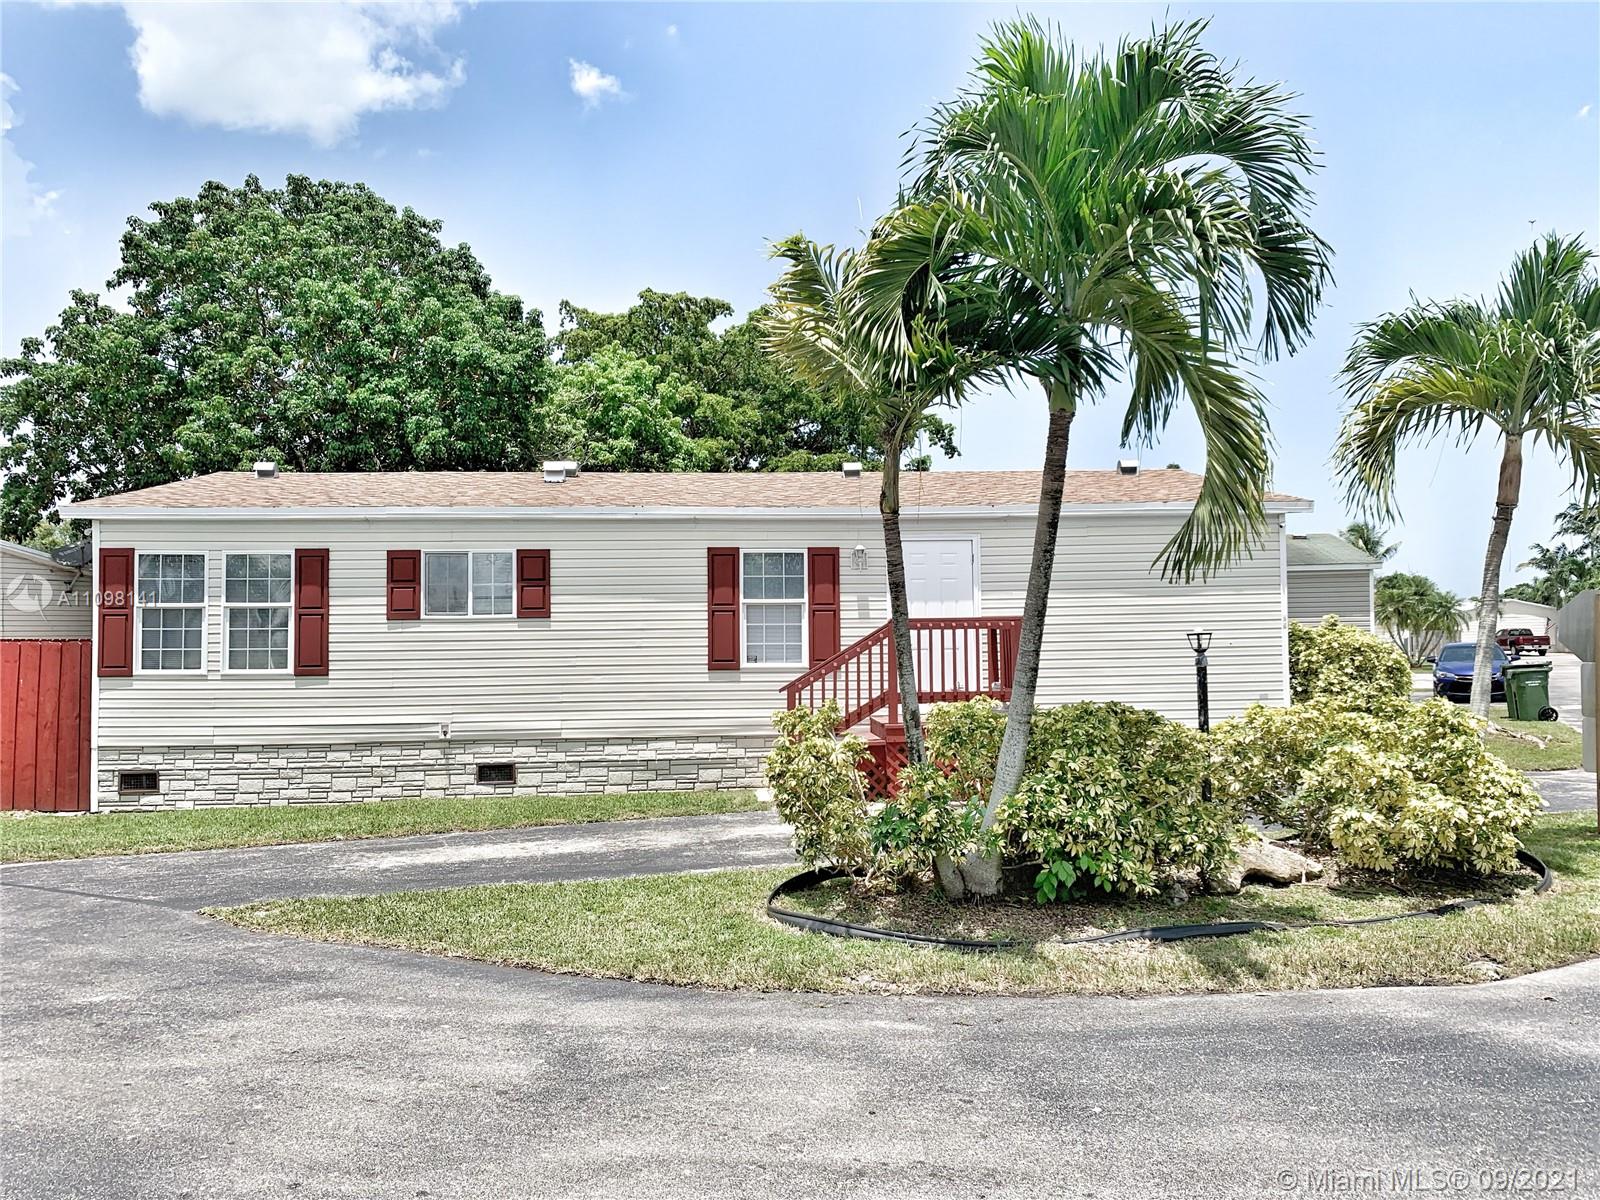 220 NE 12th Ave #89, Homestead, Florida 33030, 2 Bedrooms Bedrooms, ,2 BathroomsBathrooms,Residential,For Sale,220 NE 12th Ave #89,A11098141